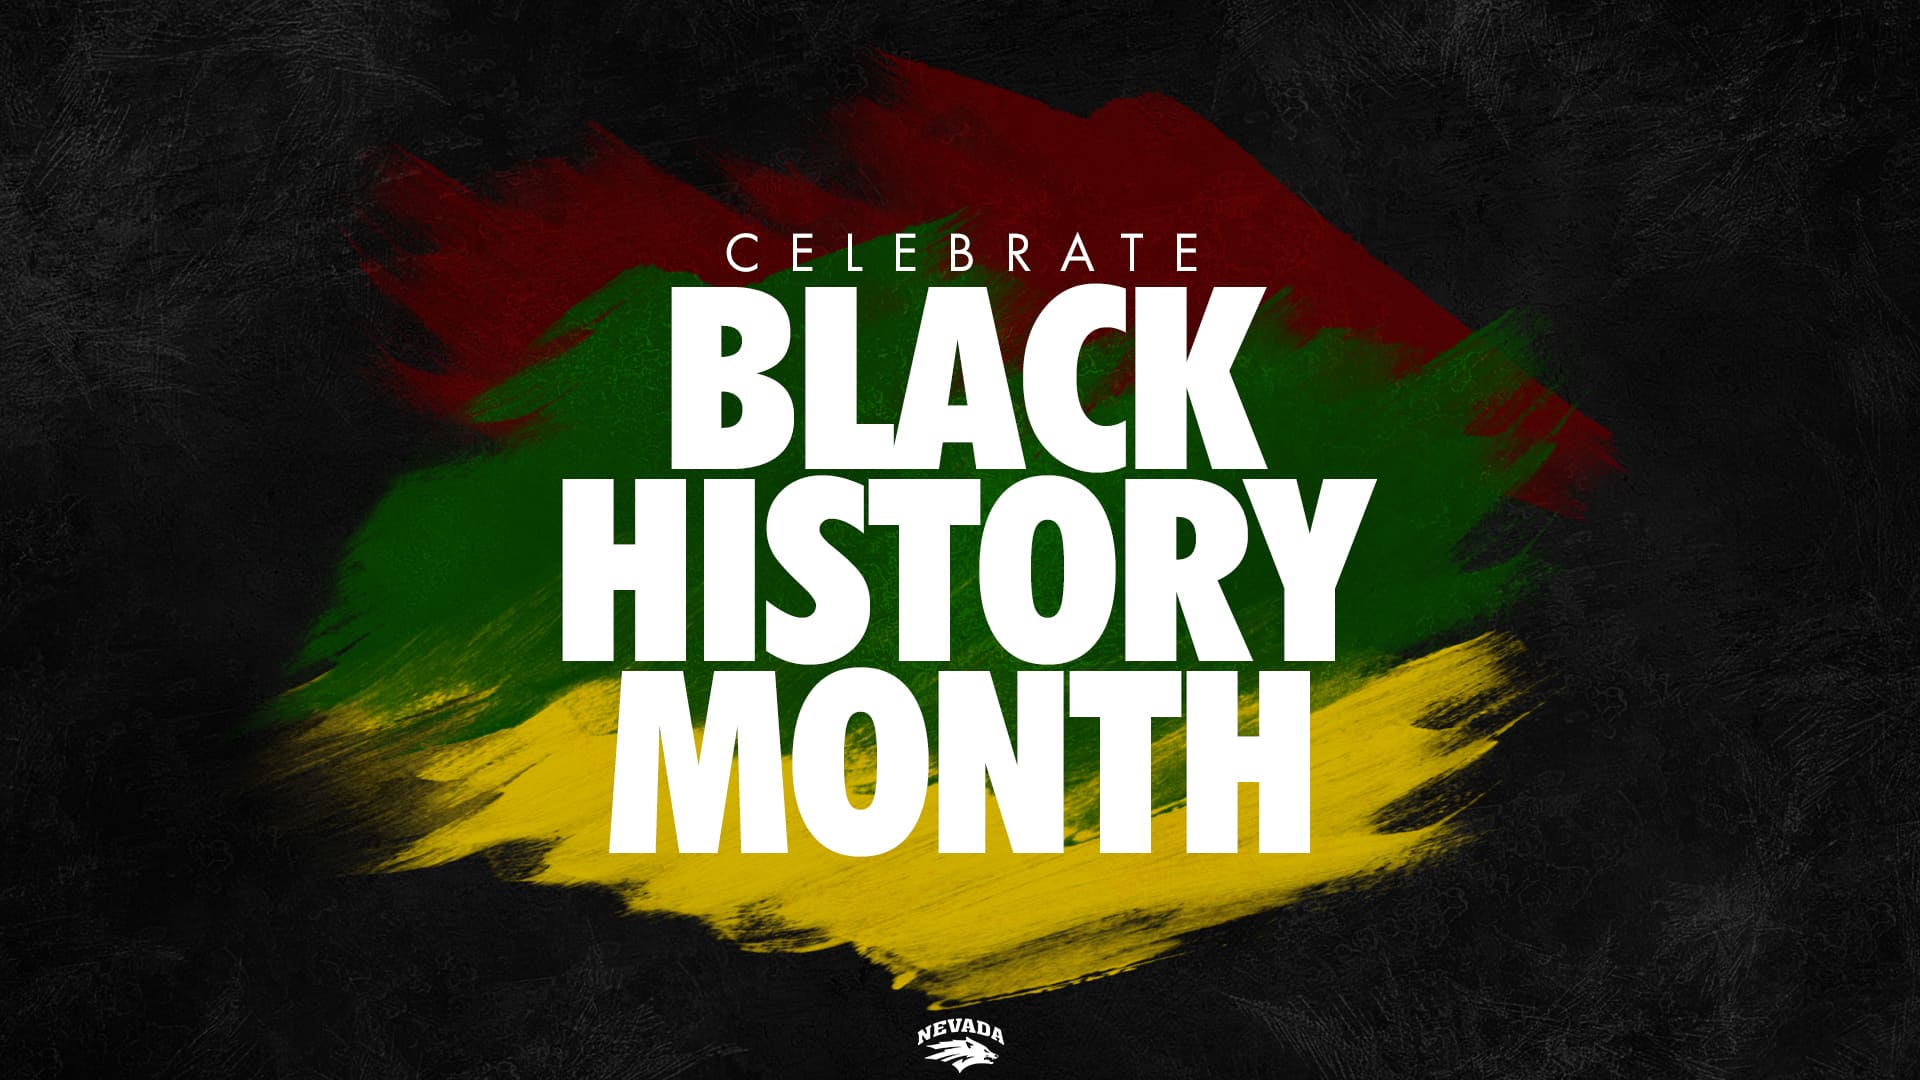 University of Nevada, Reno Black History Month logo, a black box with the words "Celebrate Black History Month" over red, green and yellow paint stroke-colors with the Nevada Sport Wolf logo at the bottom.